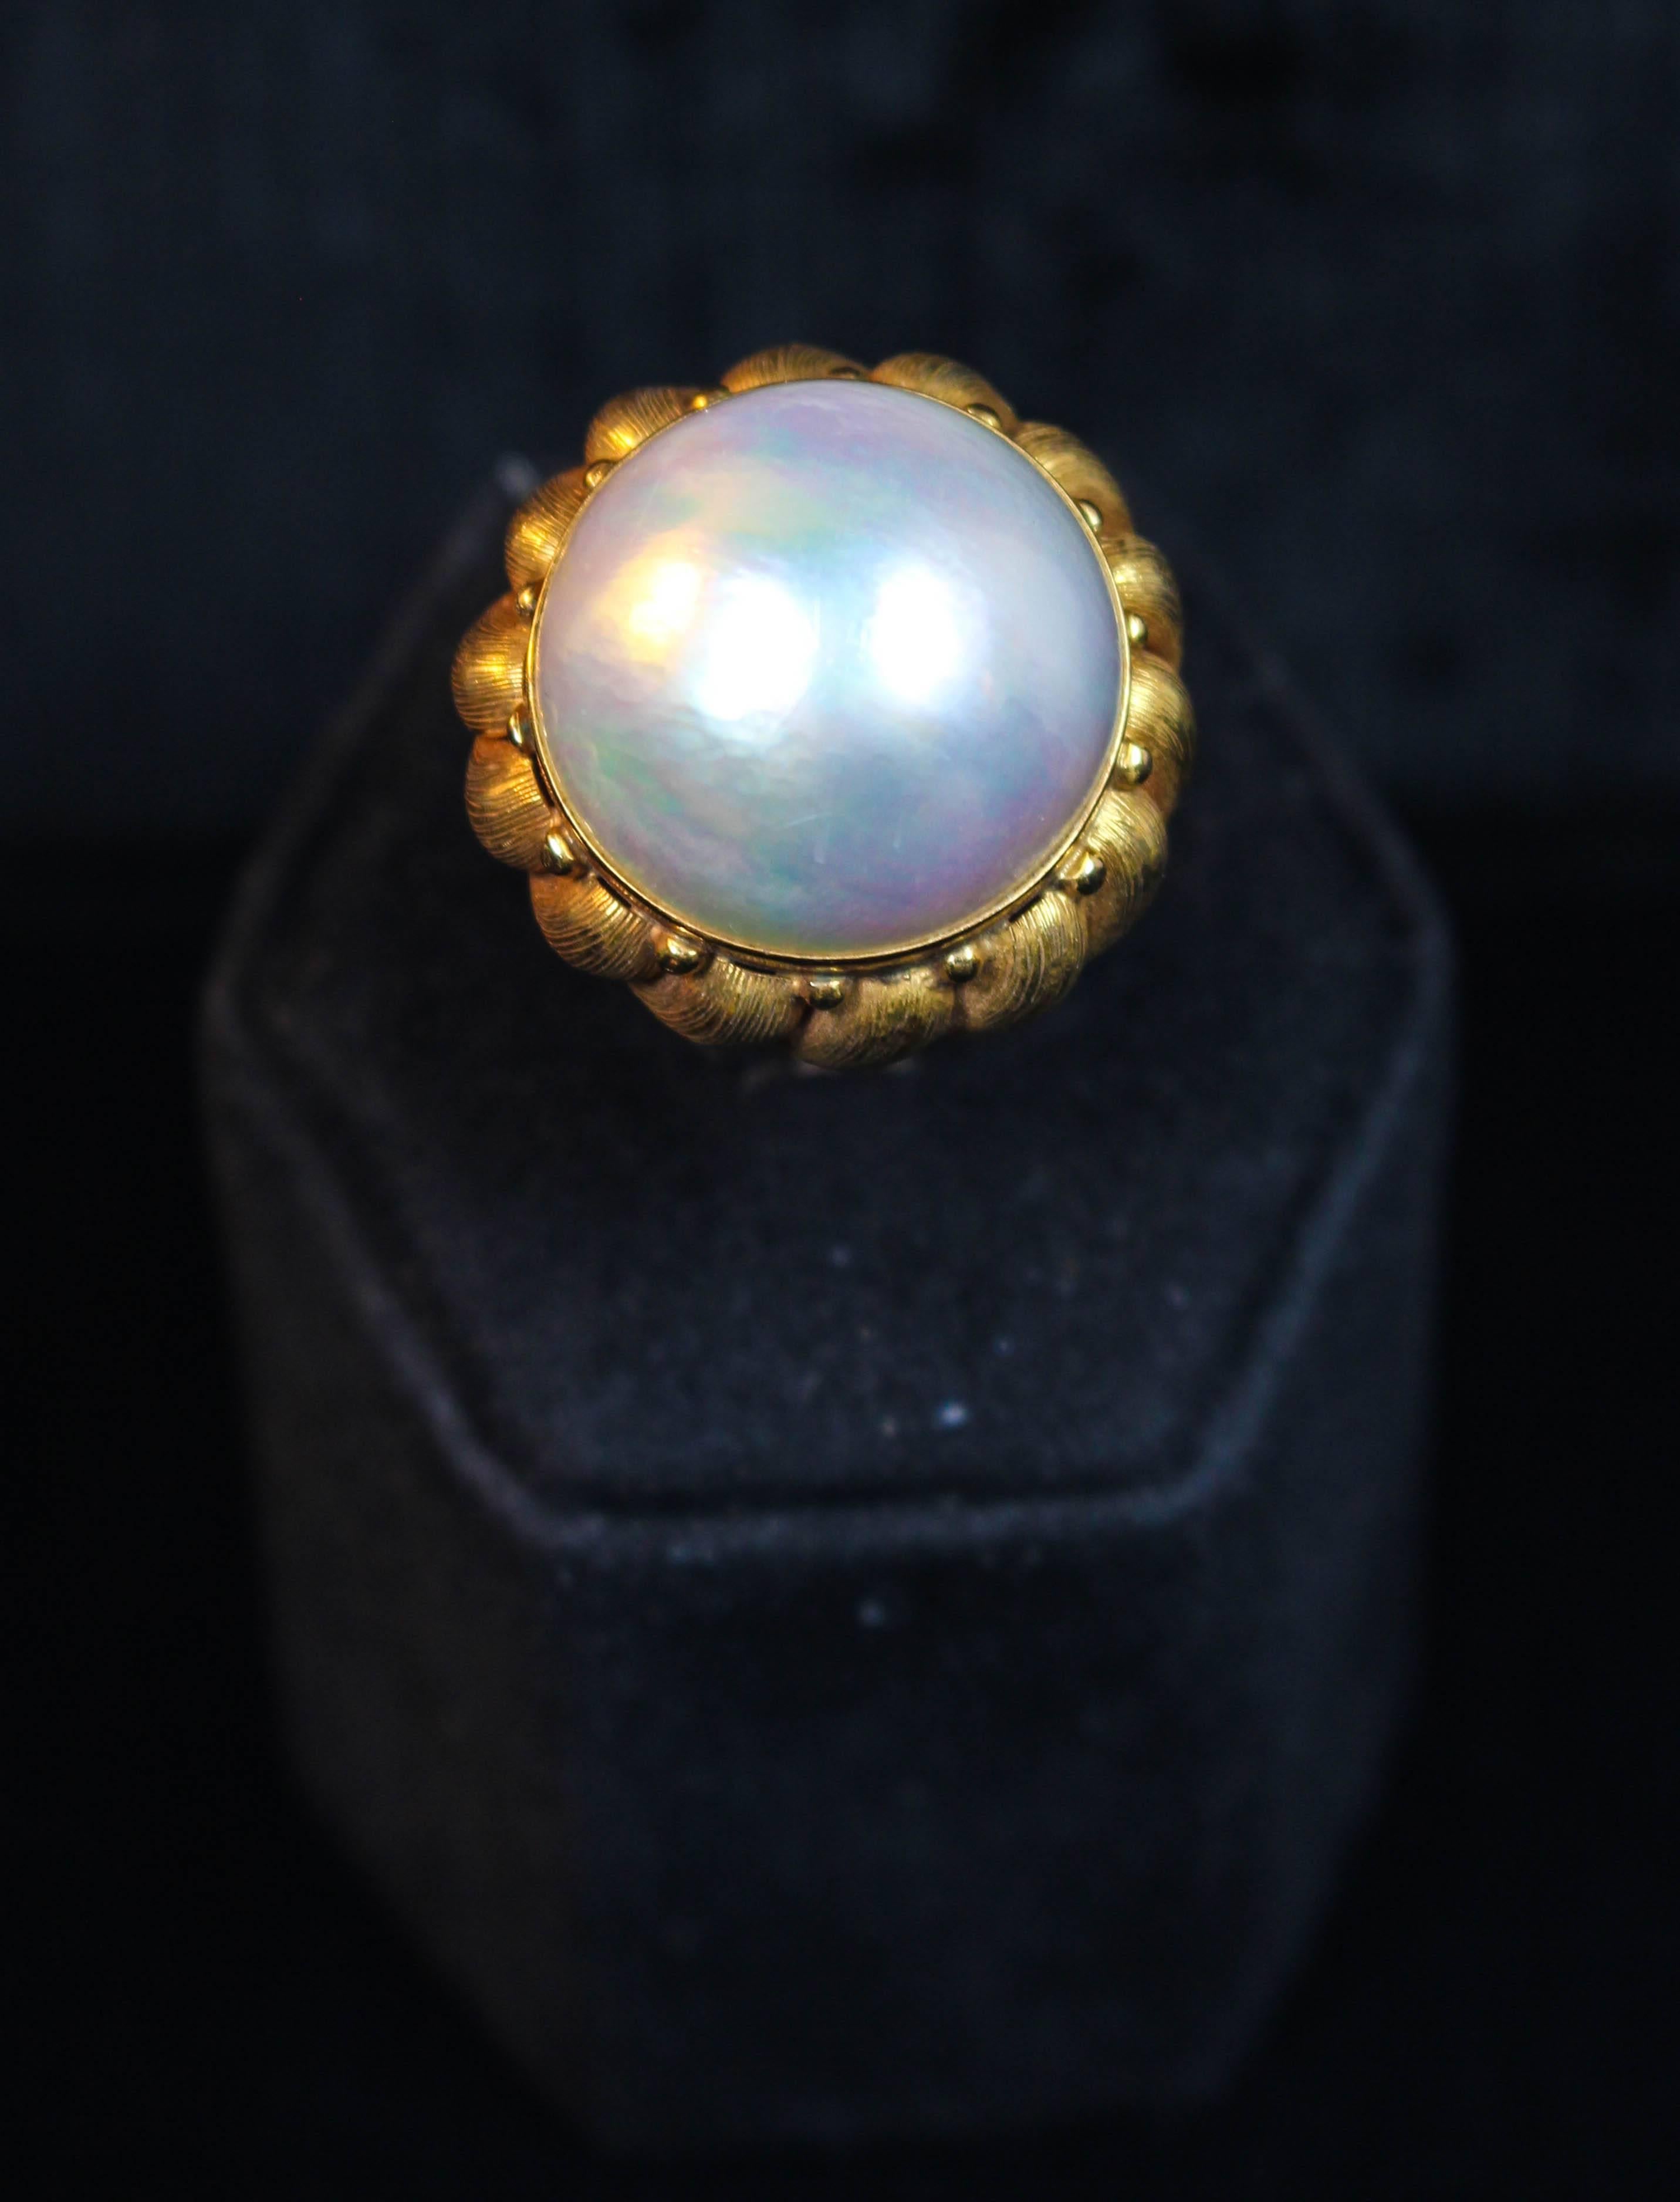 This 1970s Italian Mabe pearl ring features 14kt textured gold and a striking iridescent sheen. Specs below. In excellent condition.

Please feel free to ask any questions you may have, we are happy to assist. 

Specs:
14 KT Yellow